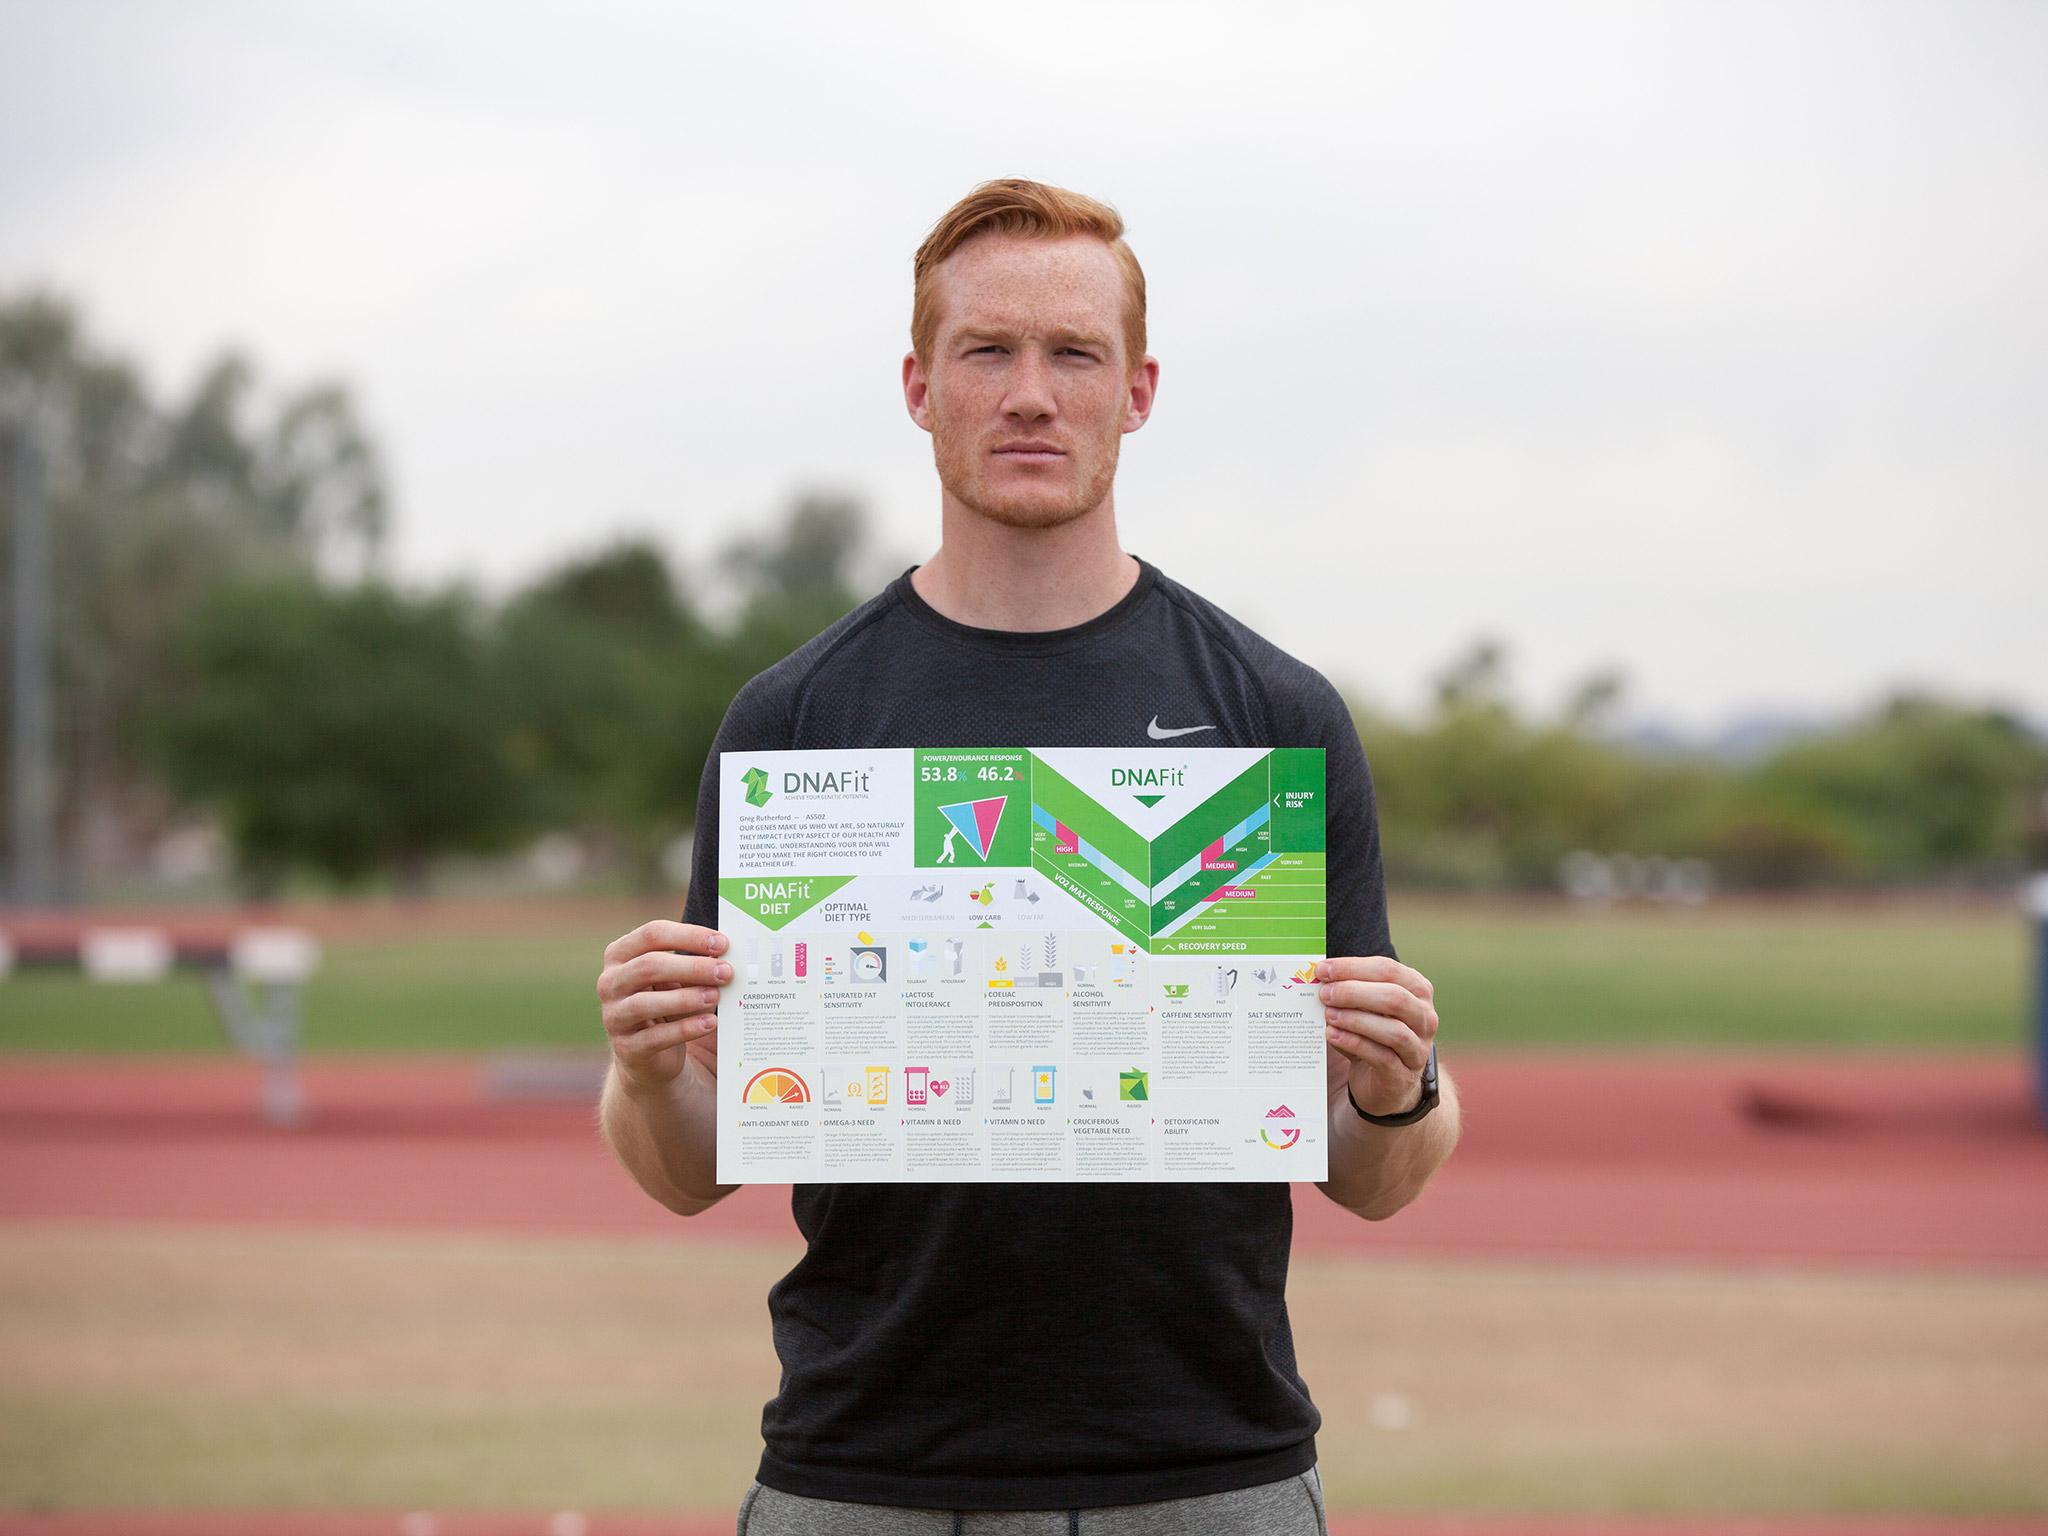 Olympic champion Greg Rutherford with his DNAFit infographic